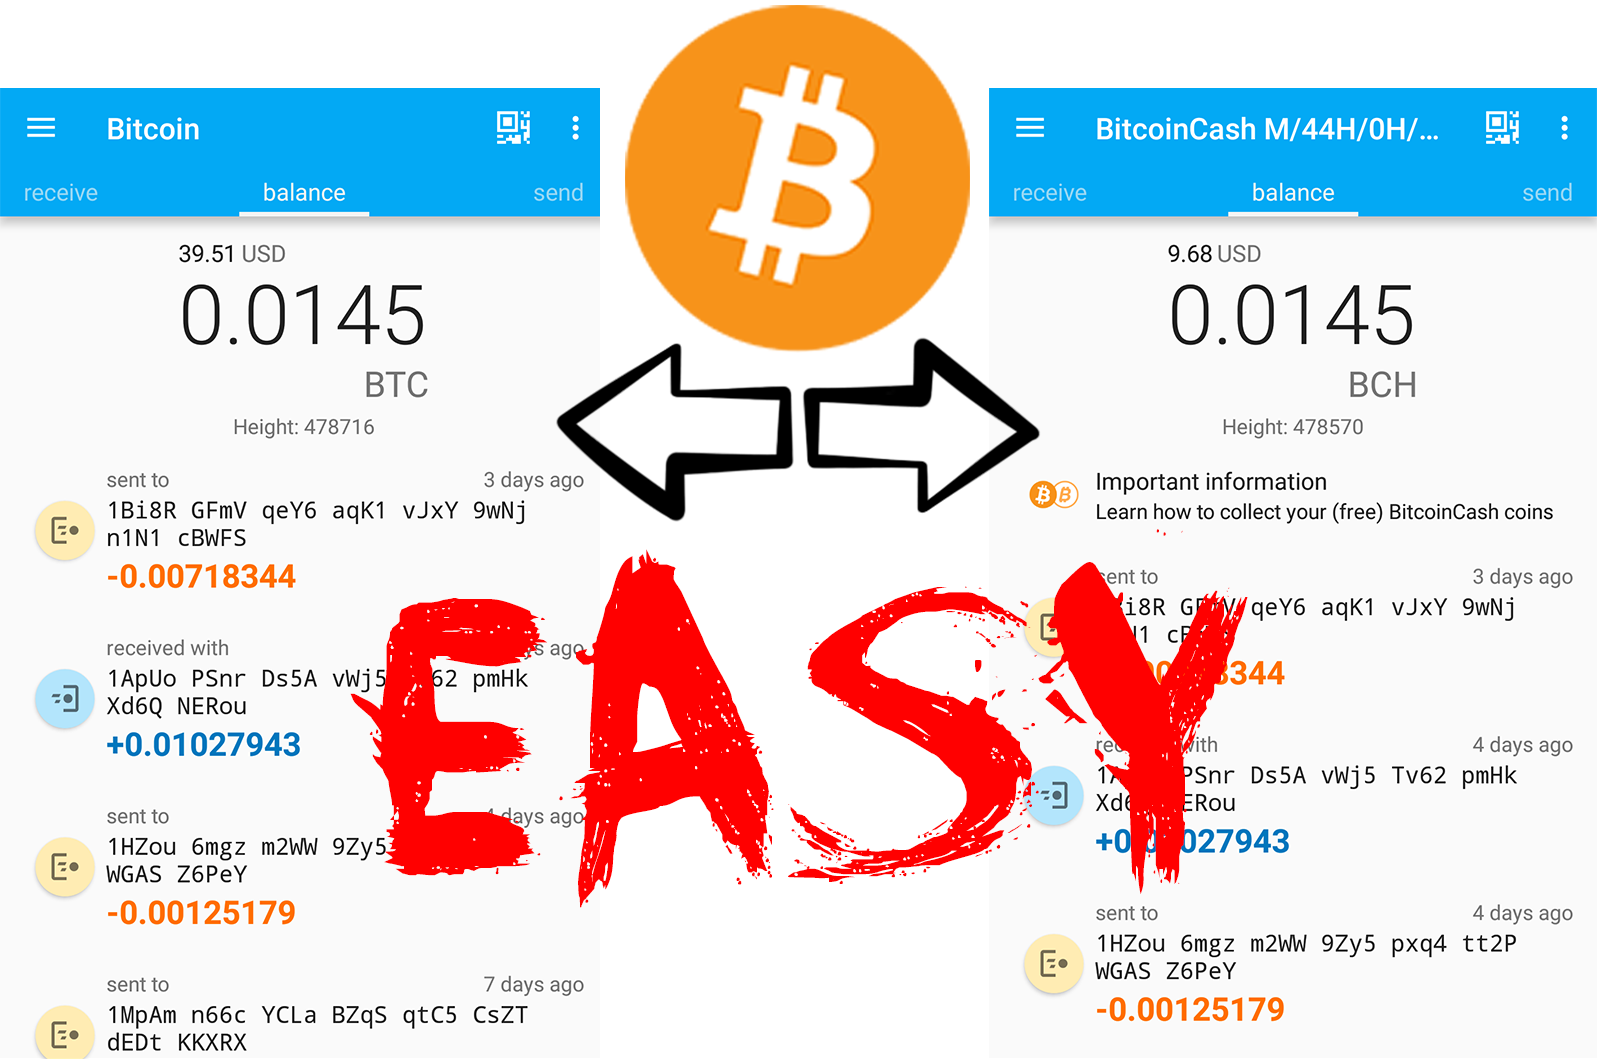 how to get a bitcoin cash wallet